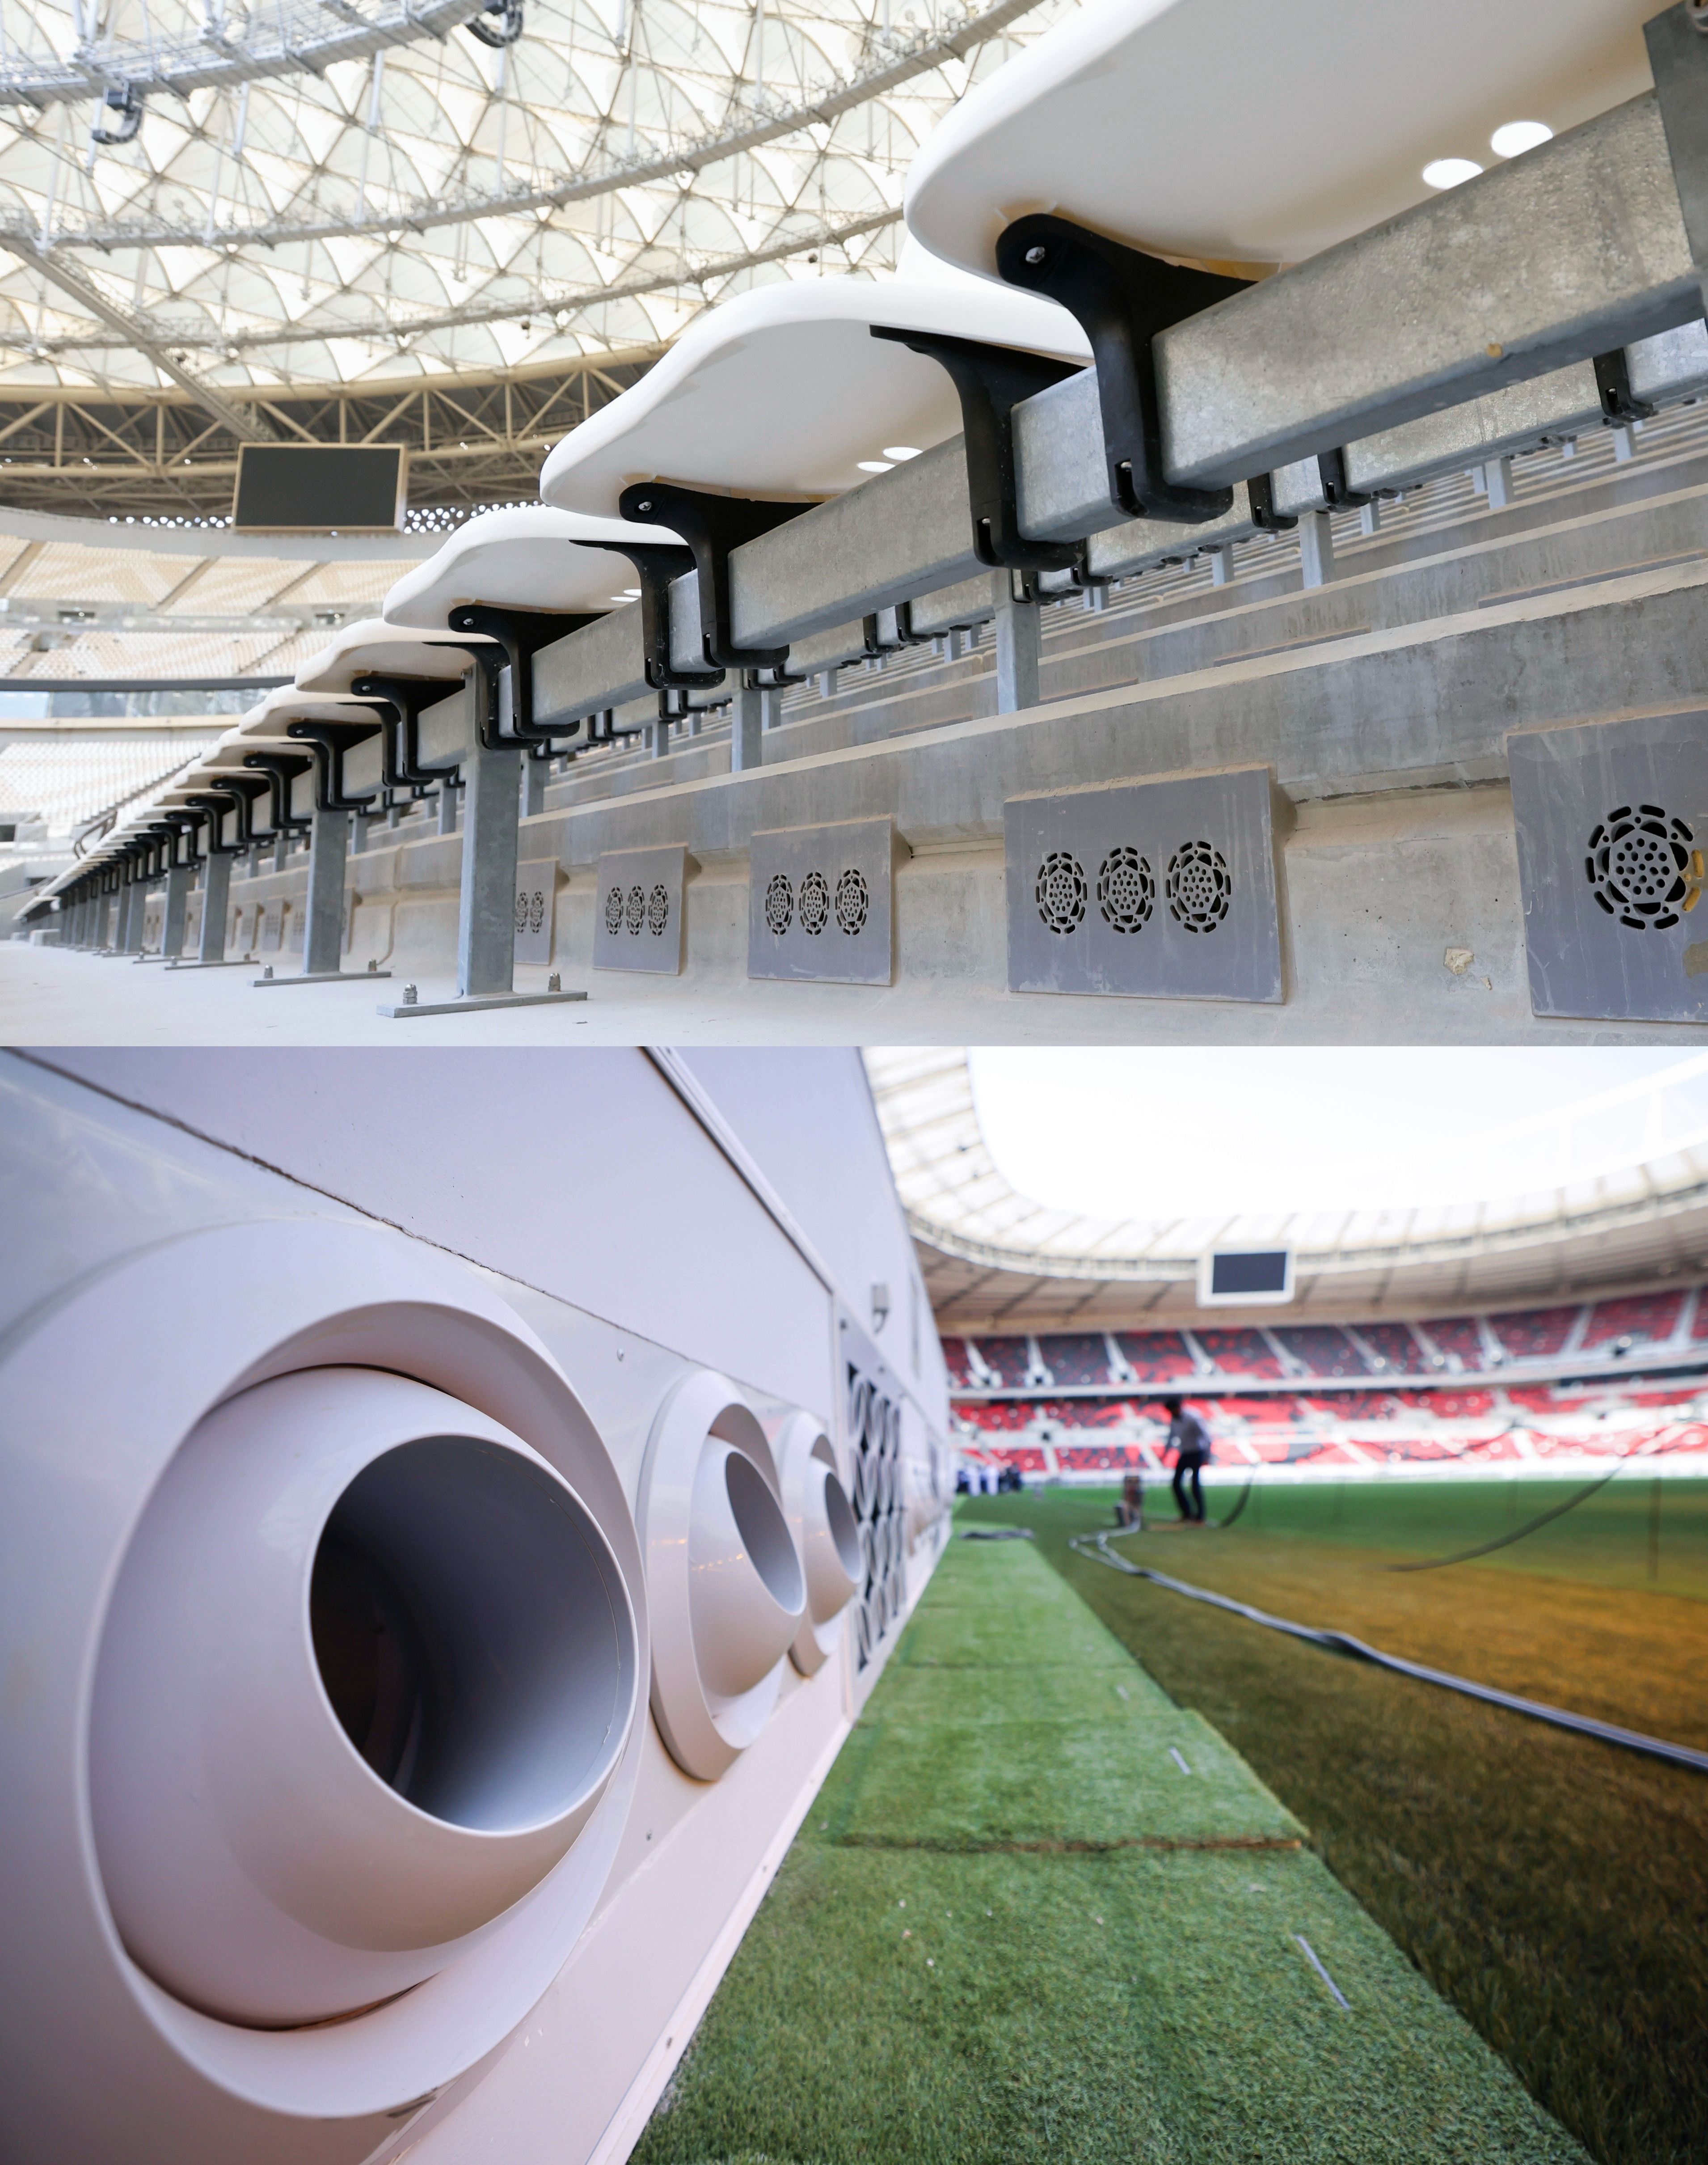 Pre-tournament photos show under-seat grills at Lusail Stadium (top) and pitch-side nozzles at Ahmad Bin Ali Stadium (bottom). These are used to blow cooled air into the arenas in Qatar. (Kyodo/AP; Christian Charisius—picture-alliance/dpa/AP)